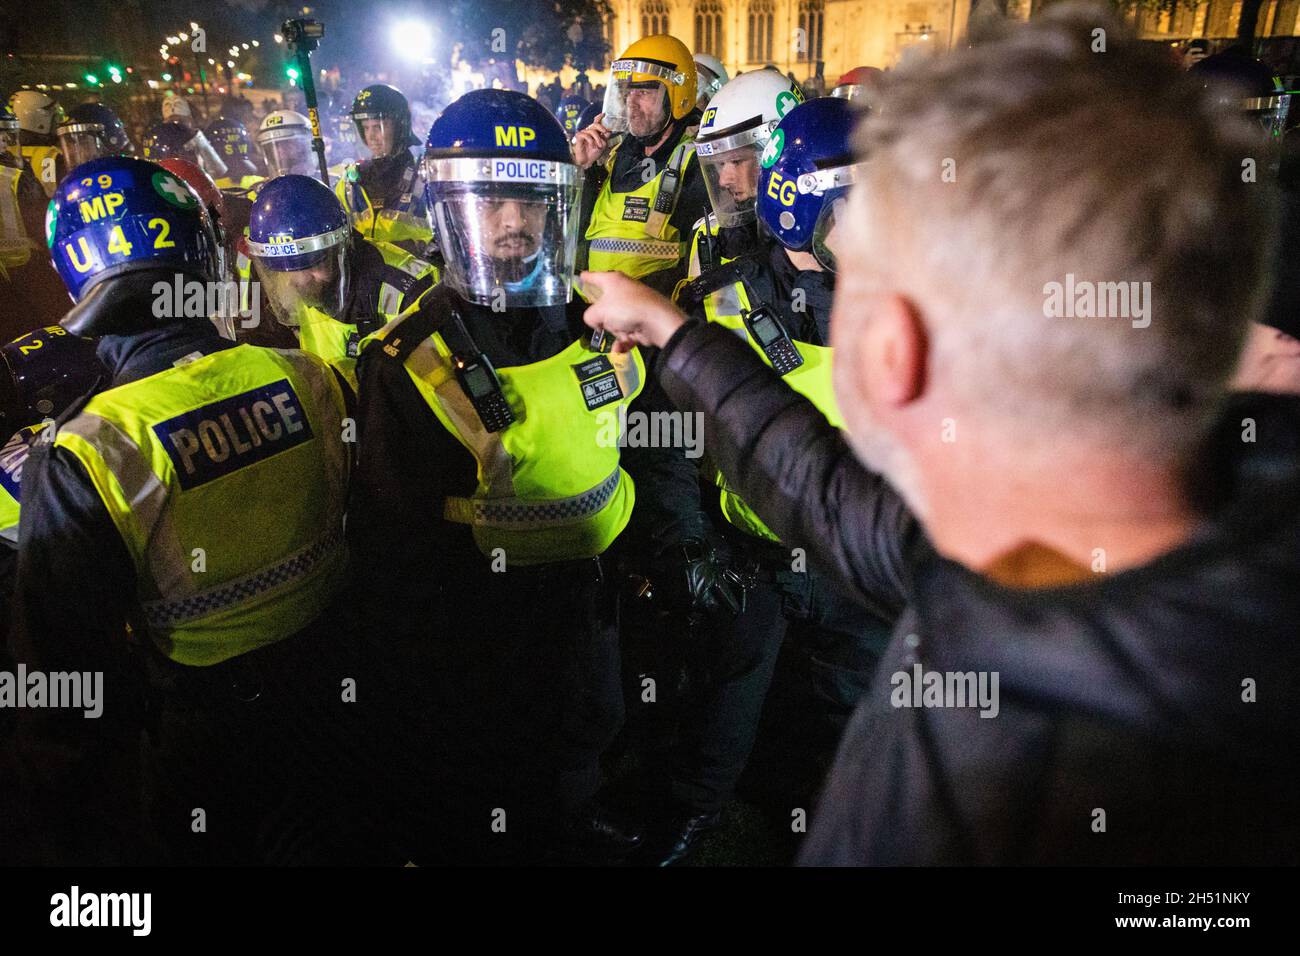 London, UK. 05th Nov, 2021. Police clash with protesters as they move in outside the Houses of Parliament during the annual Million Mask march through the city. The Anonymous movement stands in solidarity for a society which is marginalised by the political elite and associated corporations. Credit: Andy Barton/Alamy Live News Stock Photo